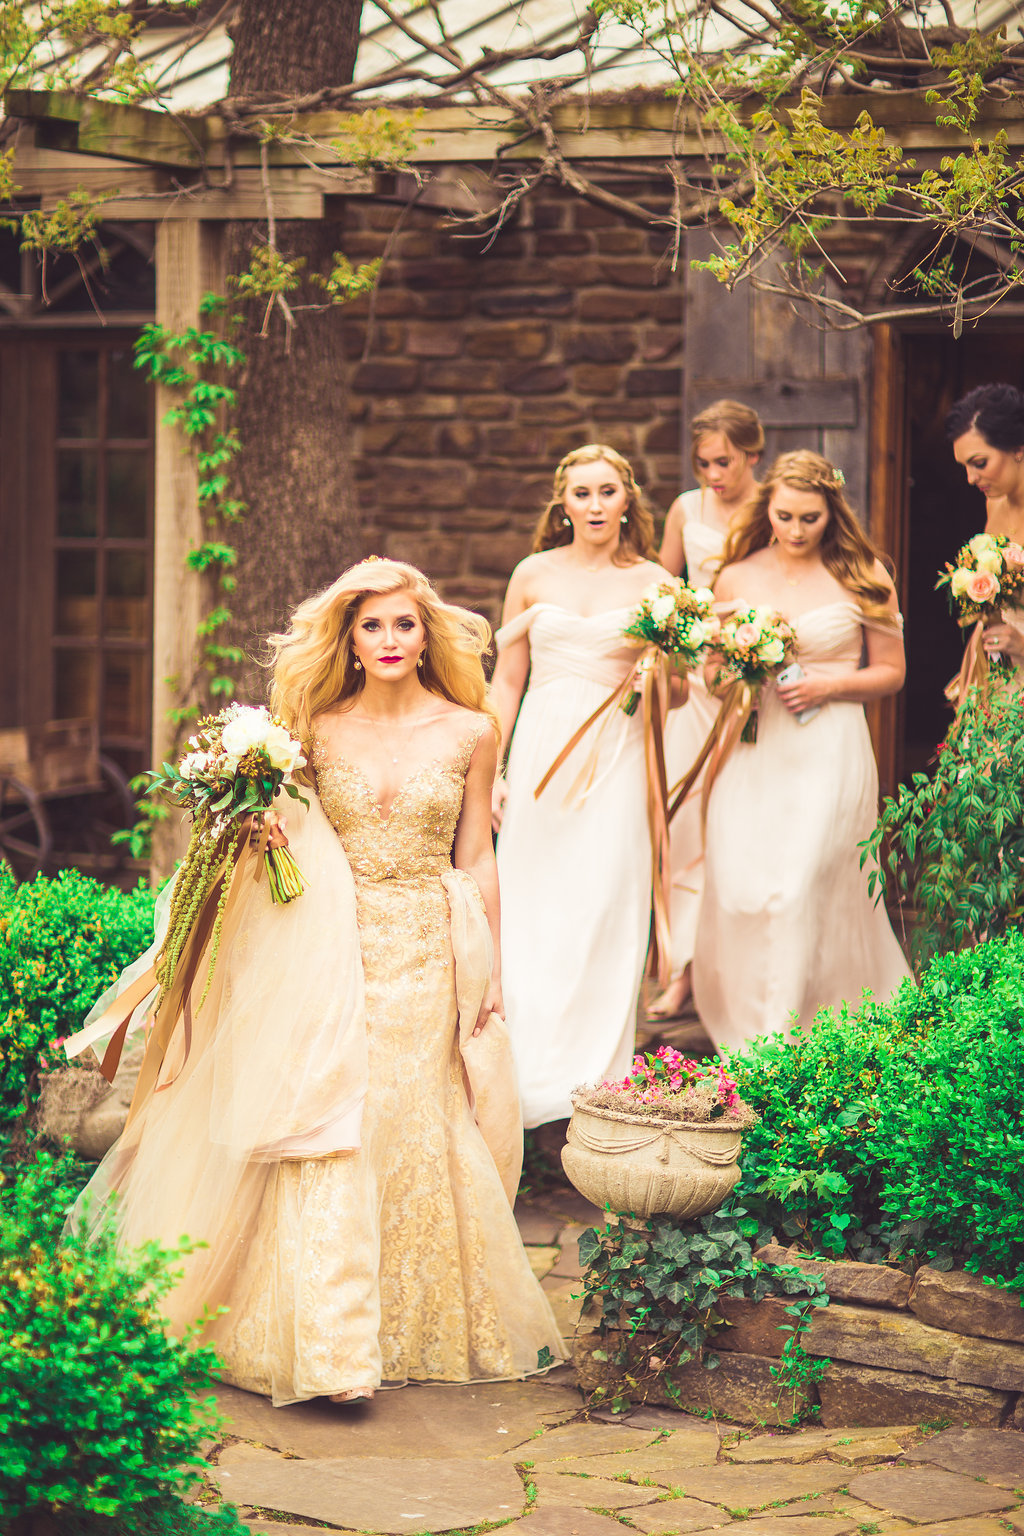 Wedding Photograph Of Bride and Bridesmaid Holding Flowers Los Angeles